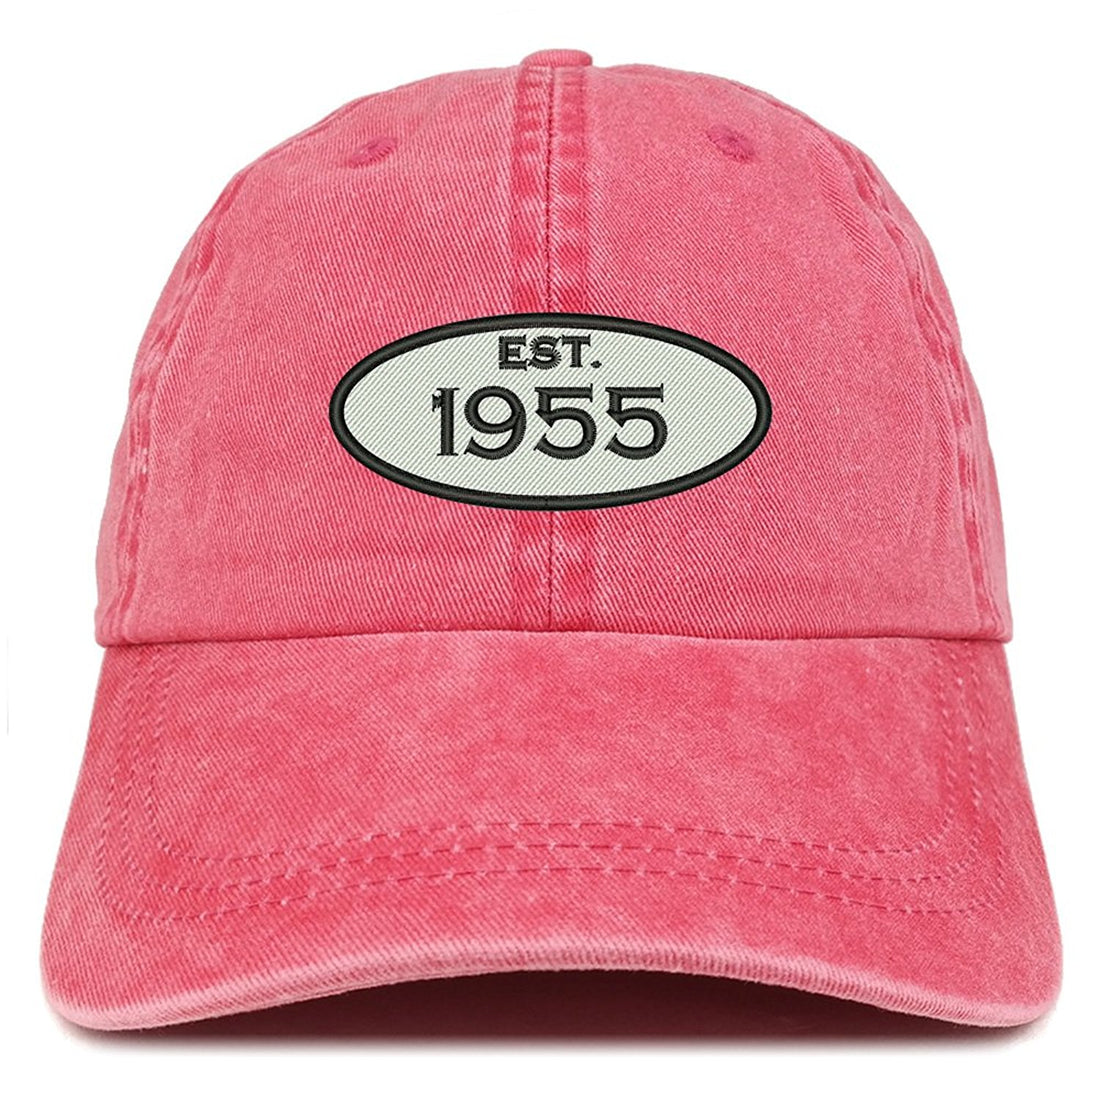 Trendy Apparel Shop Established 1955 Embroidered 64th Birthday Gift Pigment Dyed Washed Cotton Cap